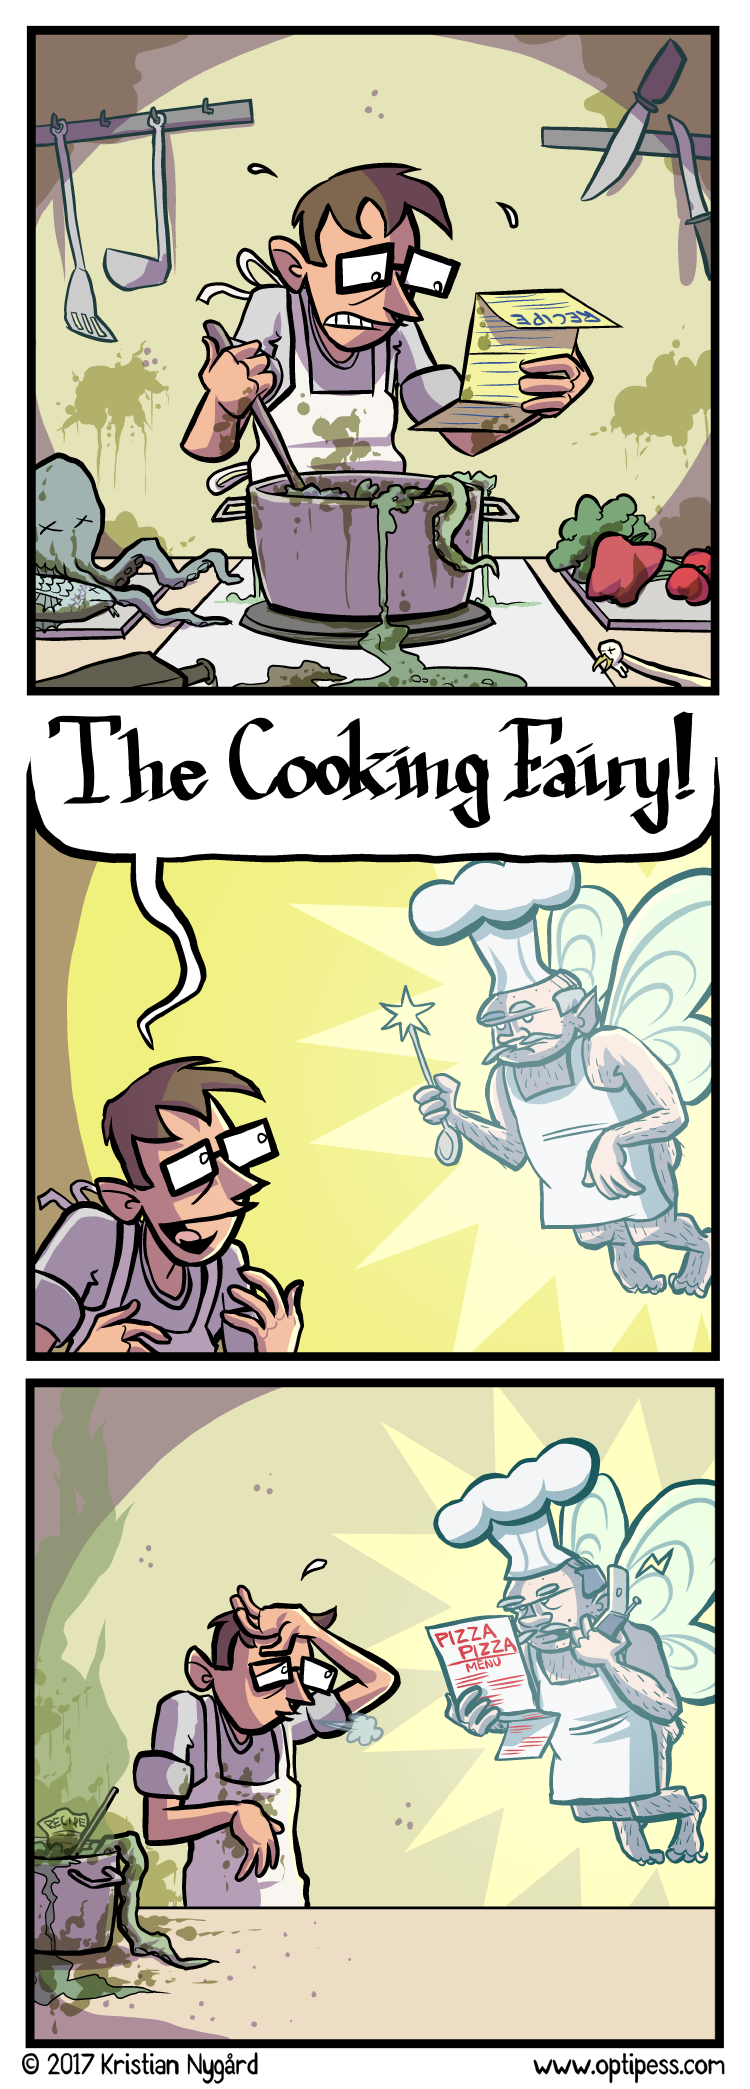 Of course, The Cooking Fairy had to show up at the pizza place as well. Where he had to order from another pizza place. And repeat.